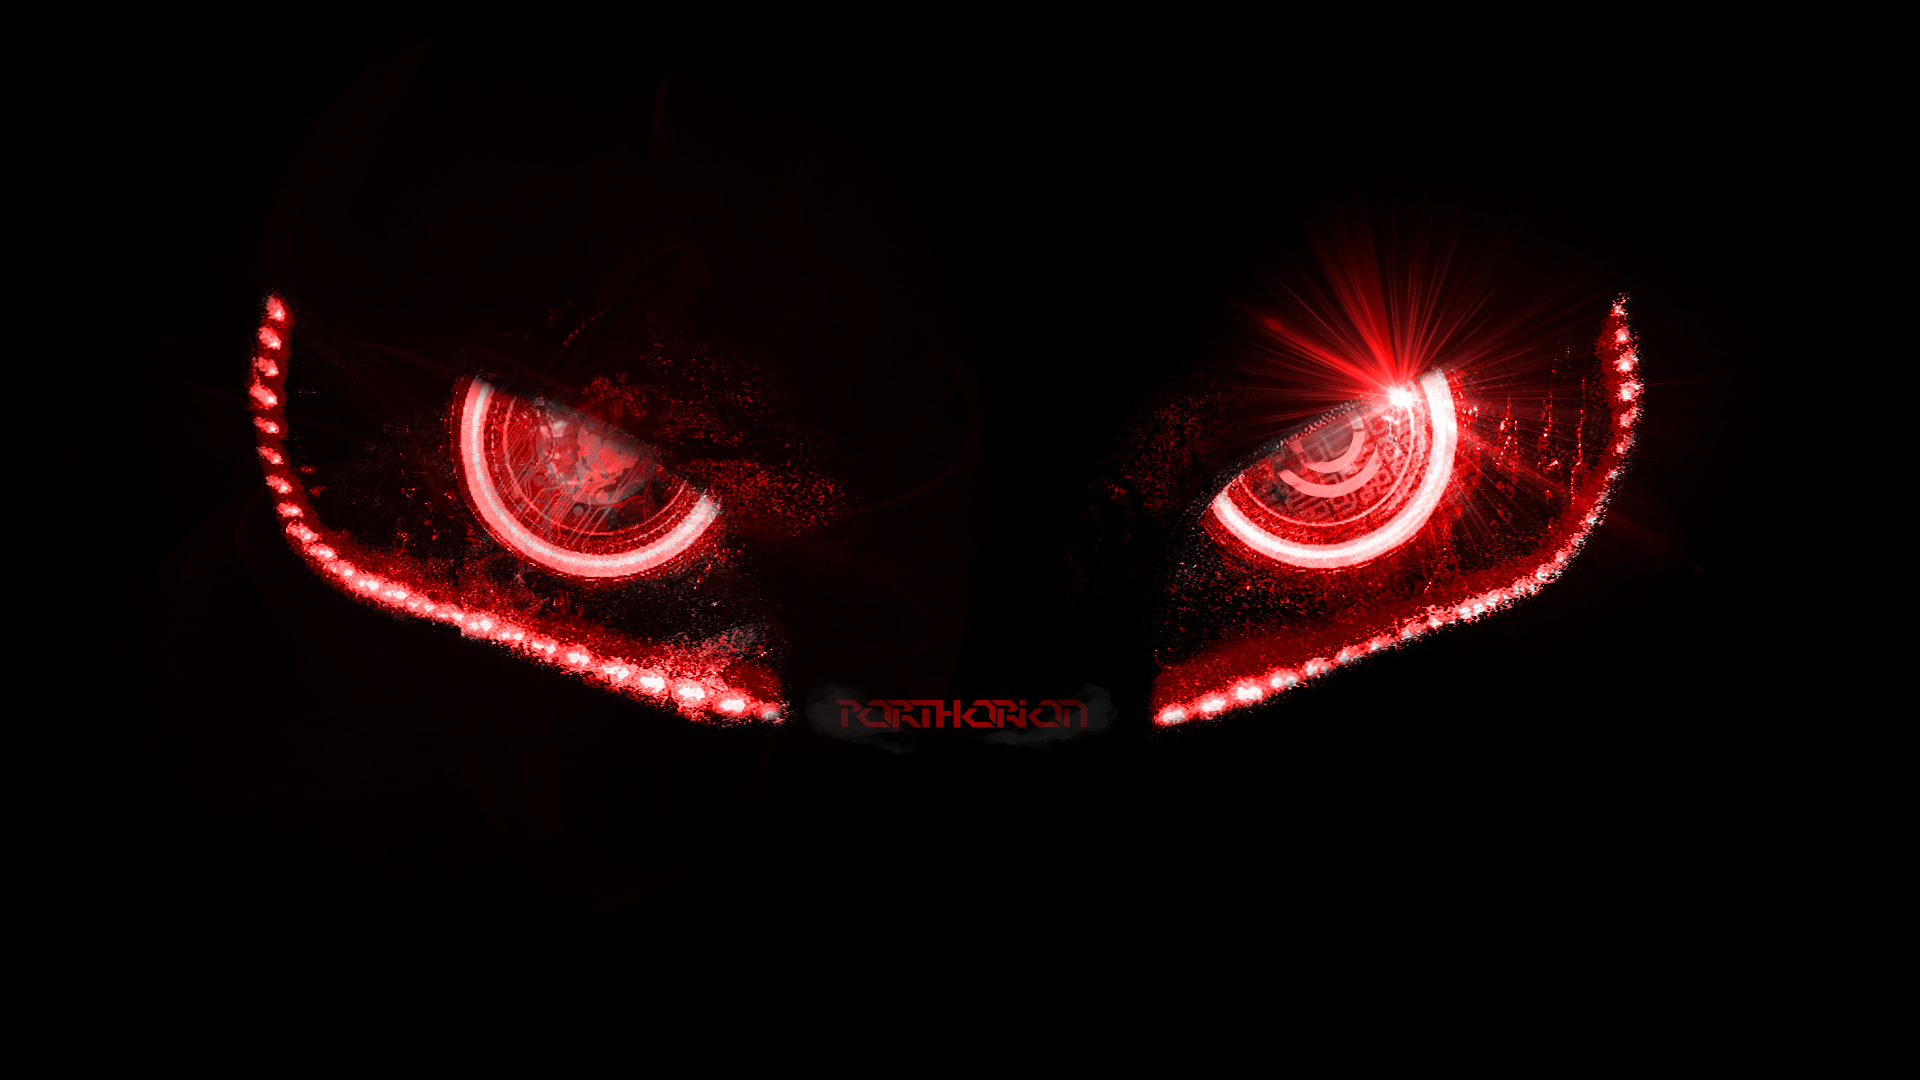 Free download evil robotic eyes without lines by porthorion customization wallpaper [1920x1080] for your Desktop, Mobile & Tablet. Explore Evil Eye Wallpaper. Evil Eye Wallpaper, Eye Wallpaper, Septic Eye Wallpaper